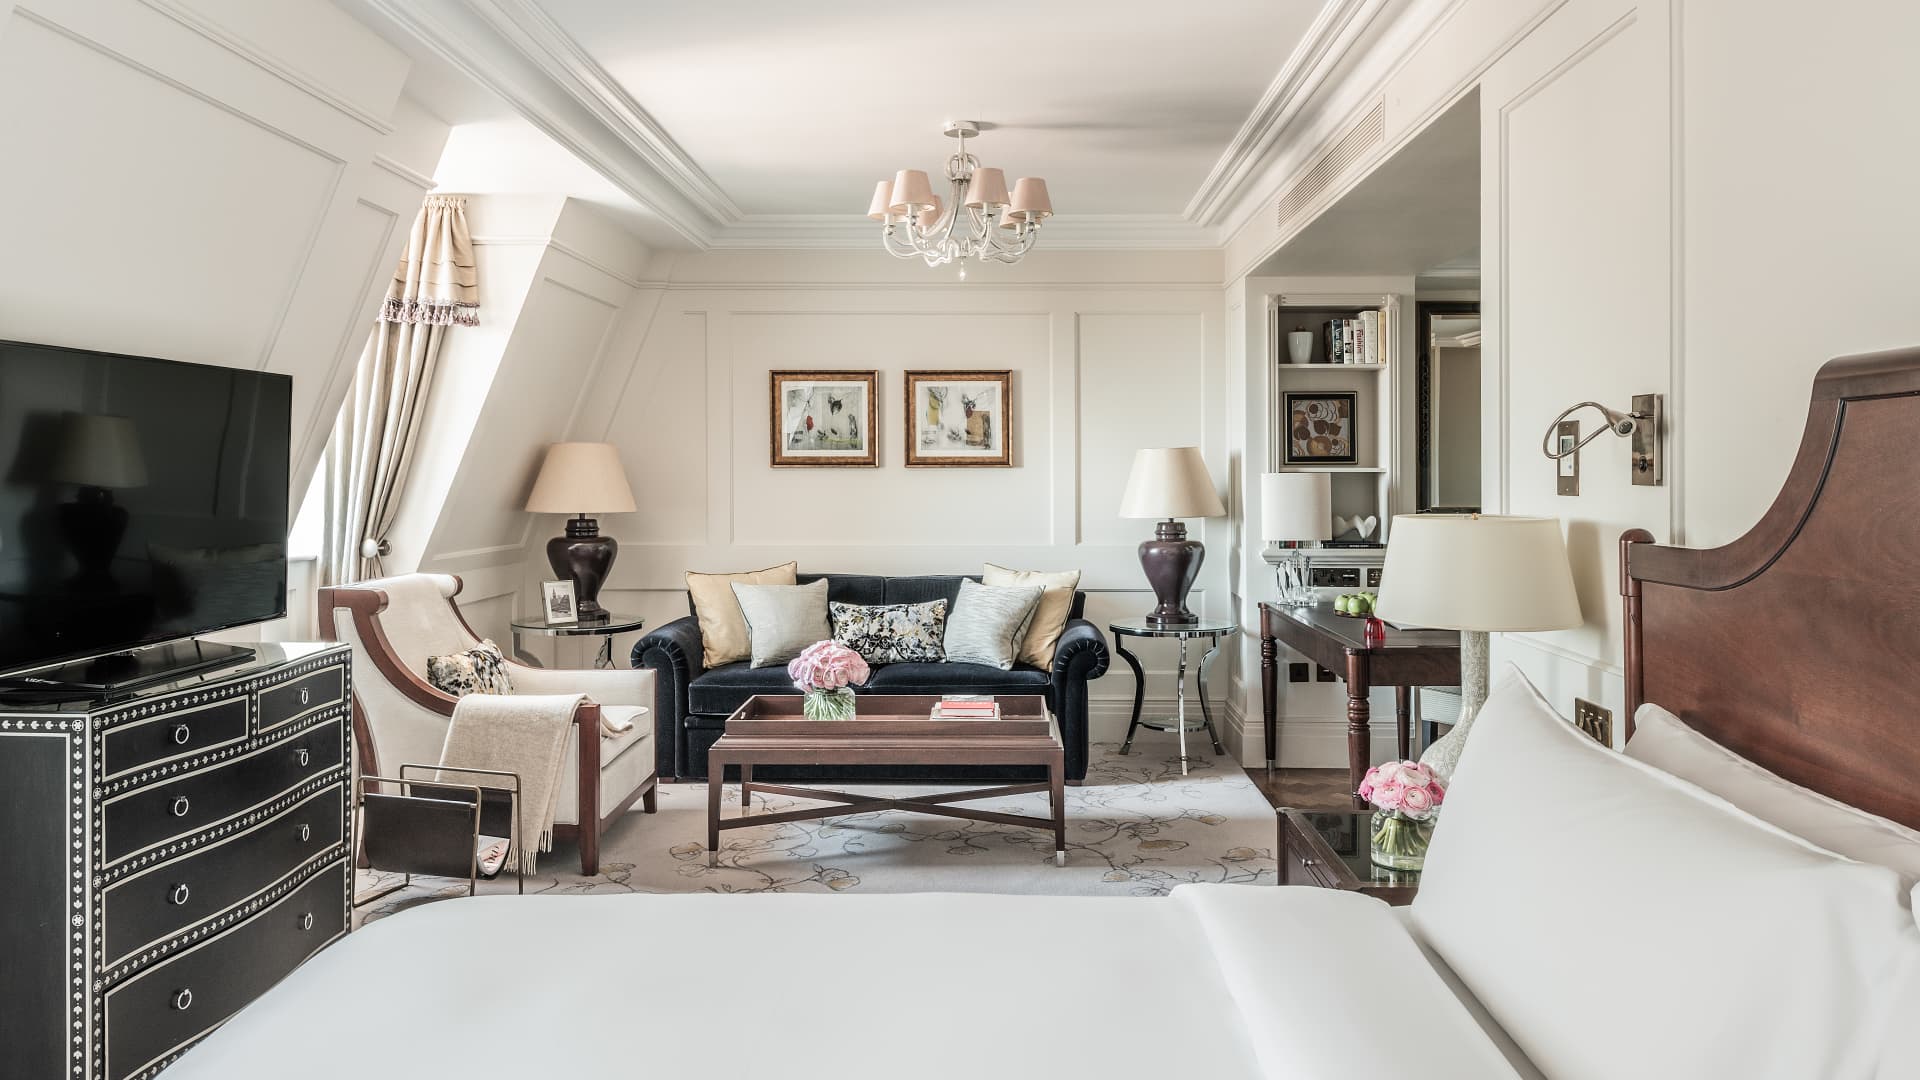 Suites at The Langham London come with access to The Langham Club, which grants perks like private check-ins, pressing services and all-day food and drinks.